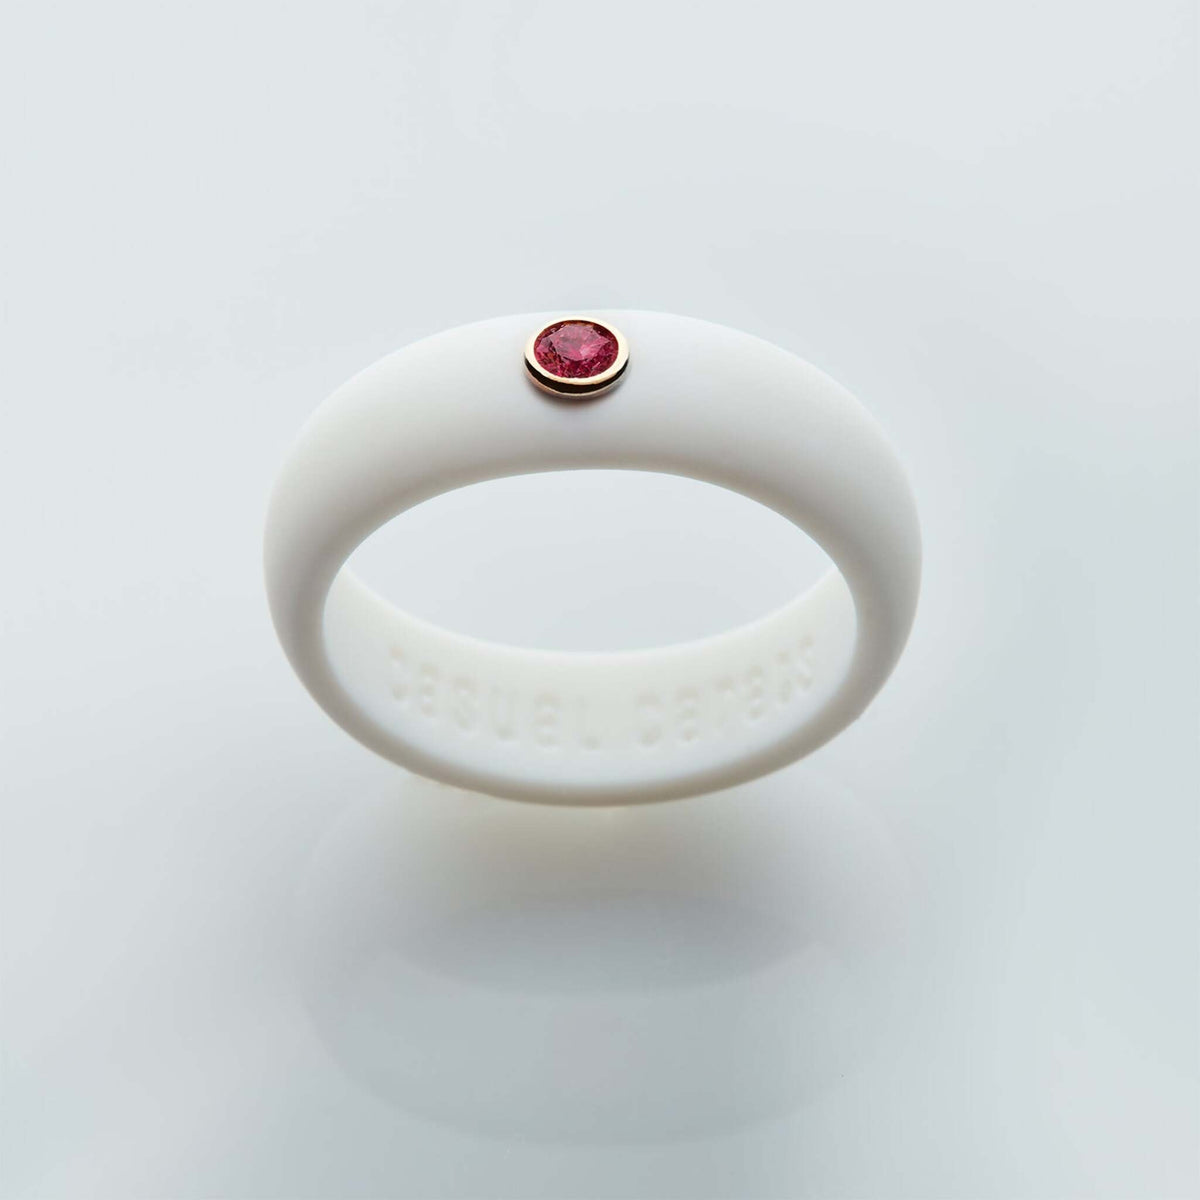 Casual Carats - Birthstone Collection - July - Ruby Silicone Ring / Available in a Variety of Silicone Band Colors